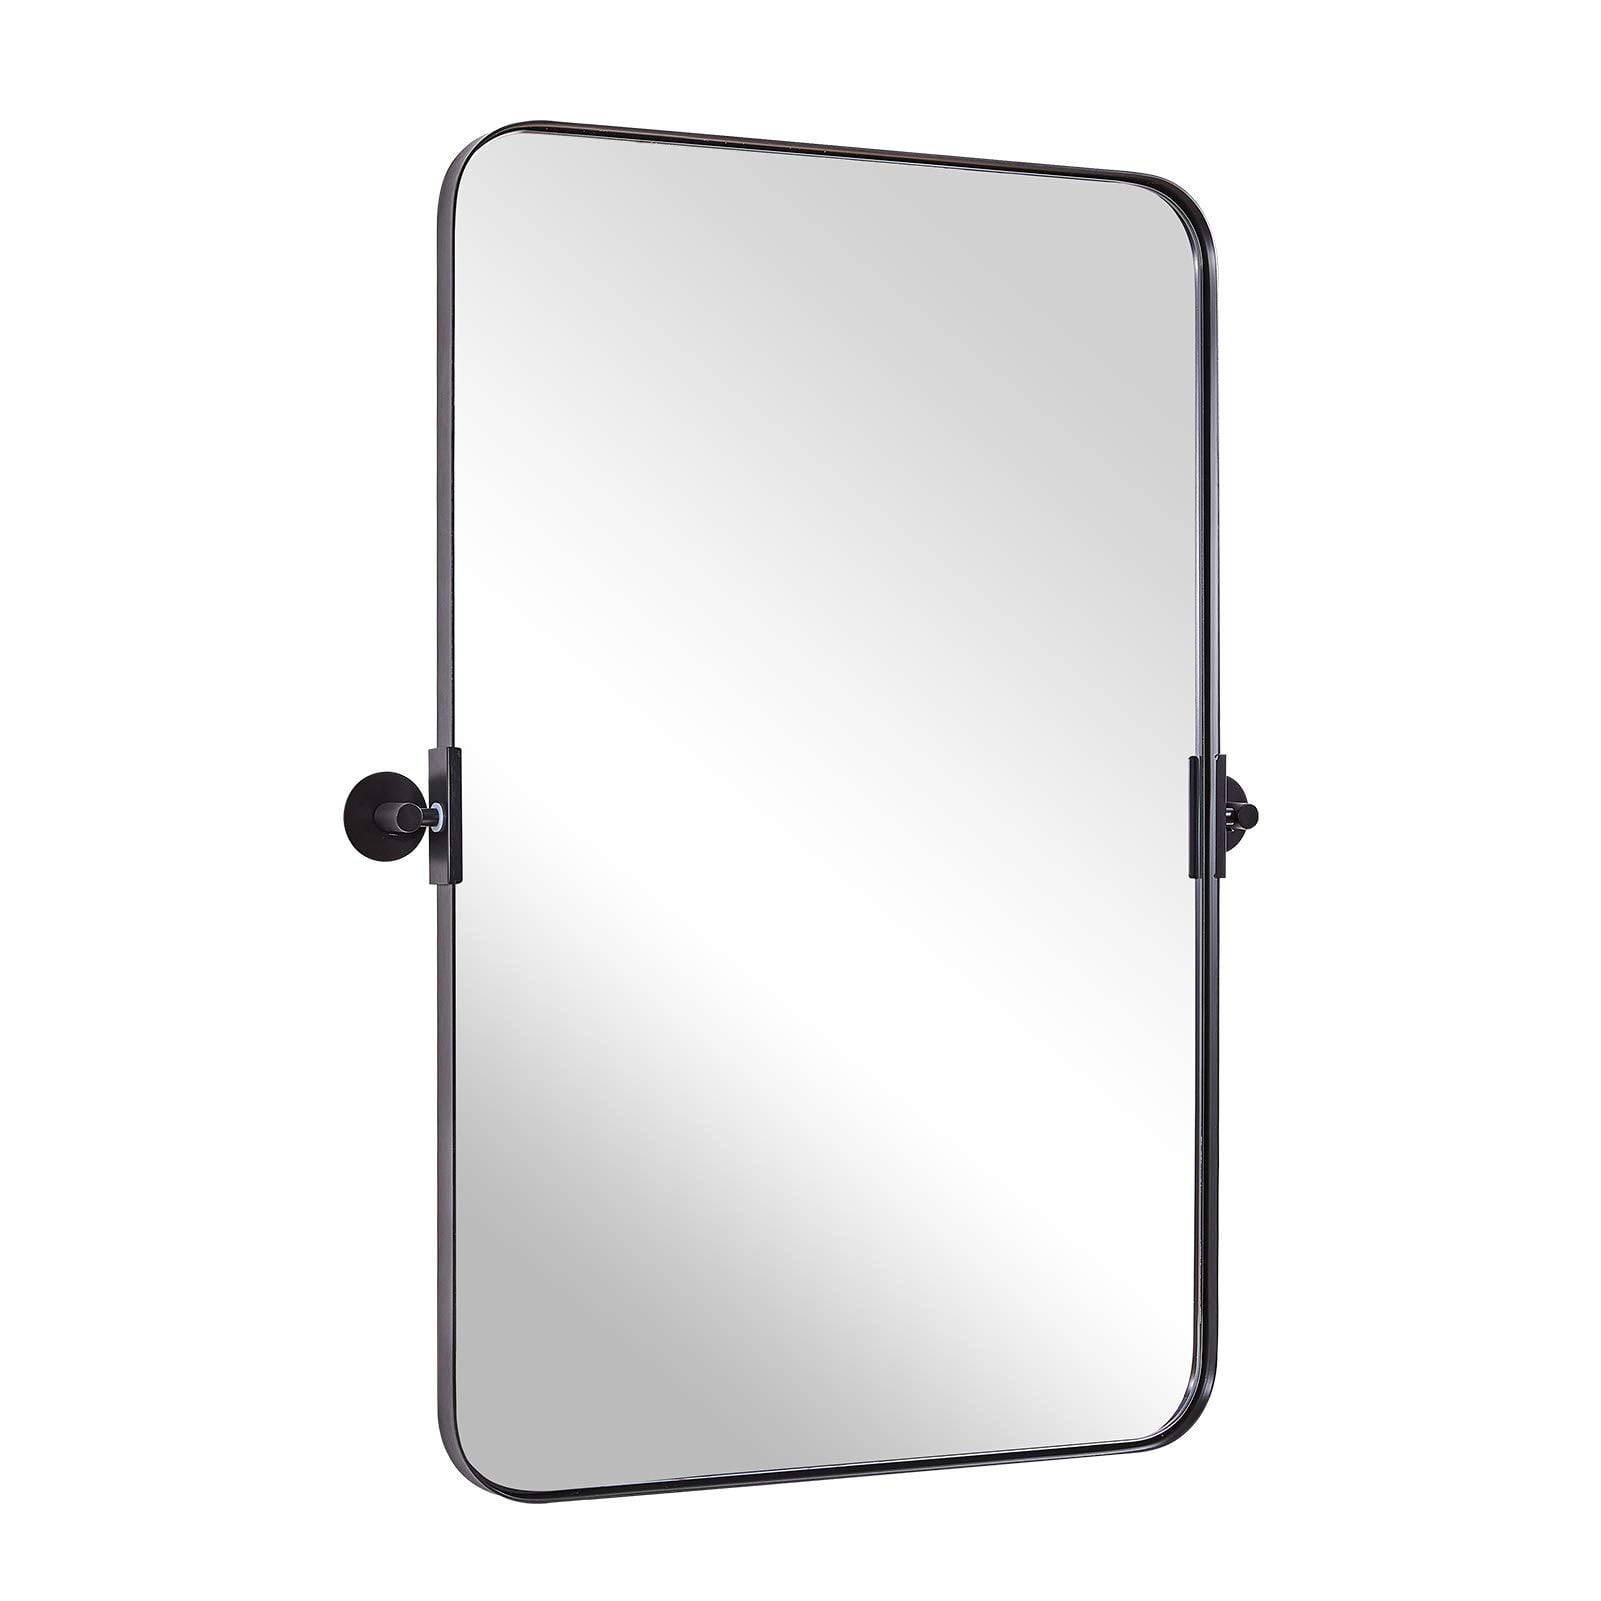 Moon Mirror 24 X36 Matte Black Pivot, High Quality Mirrors Are Made By Using